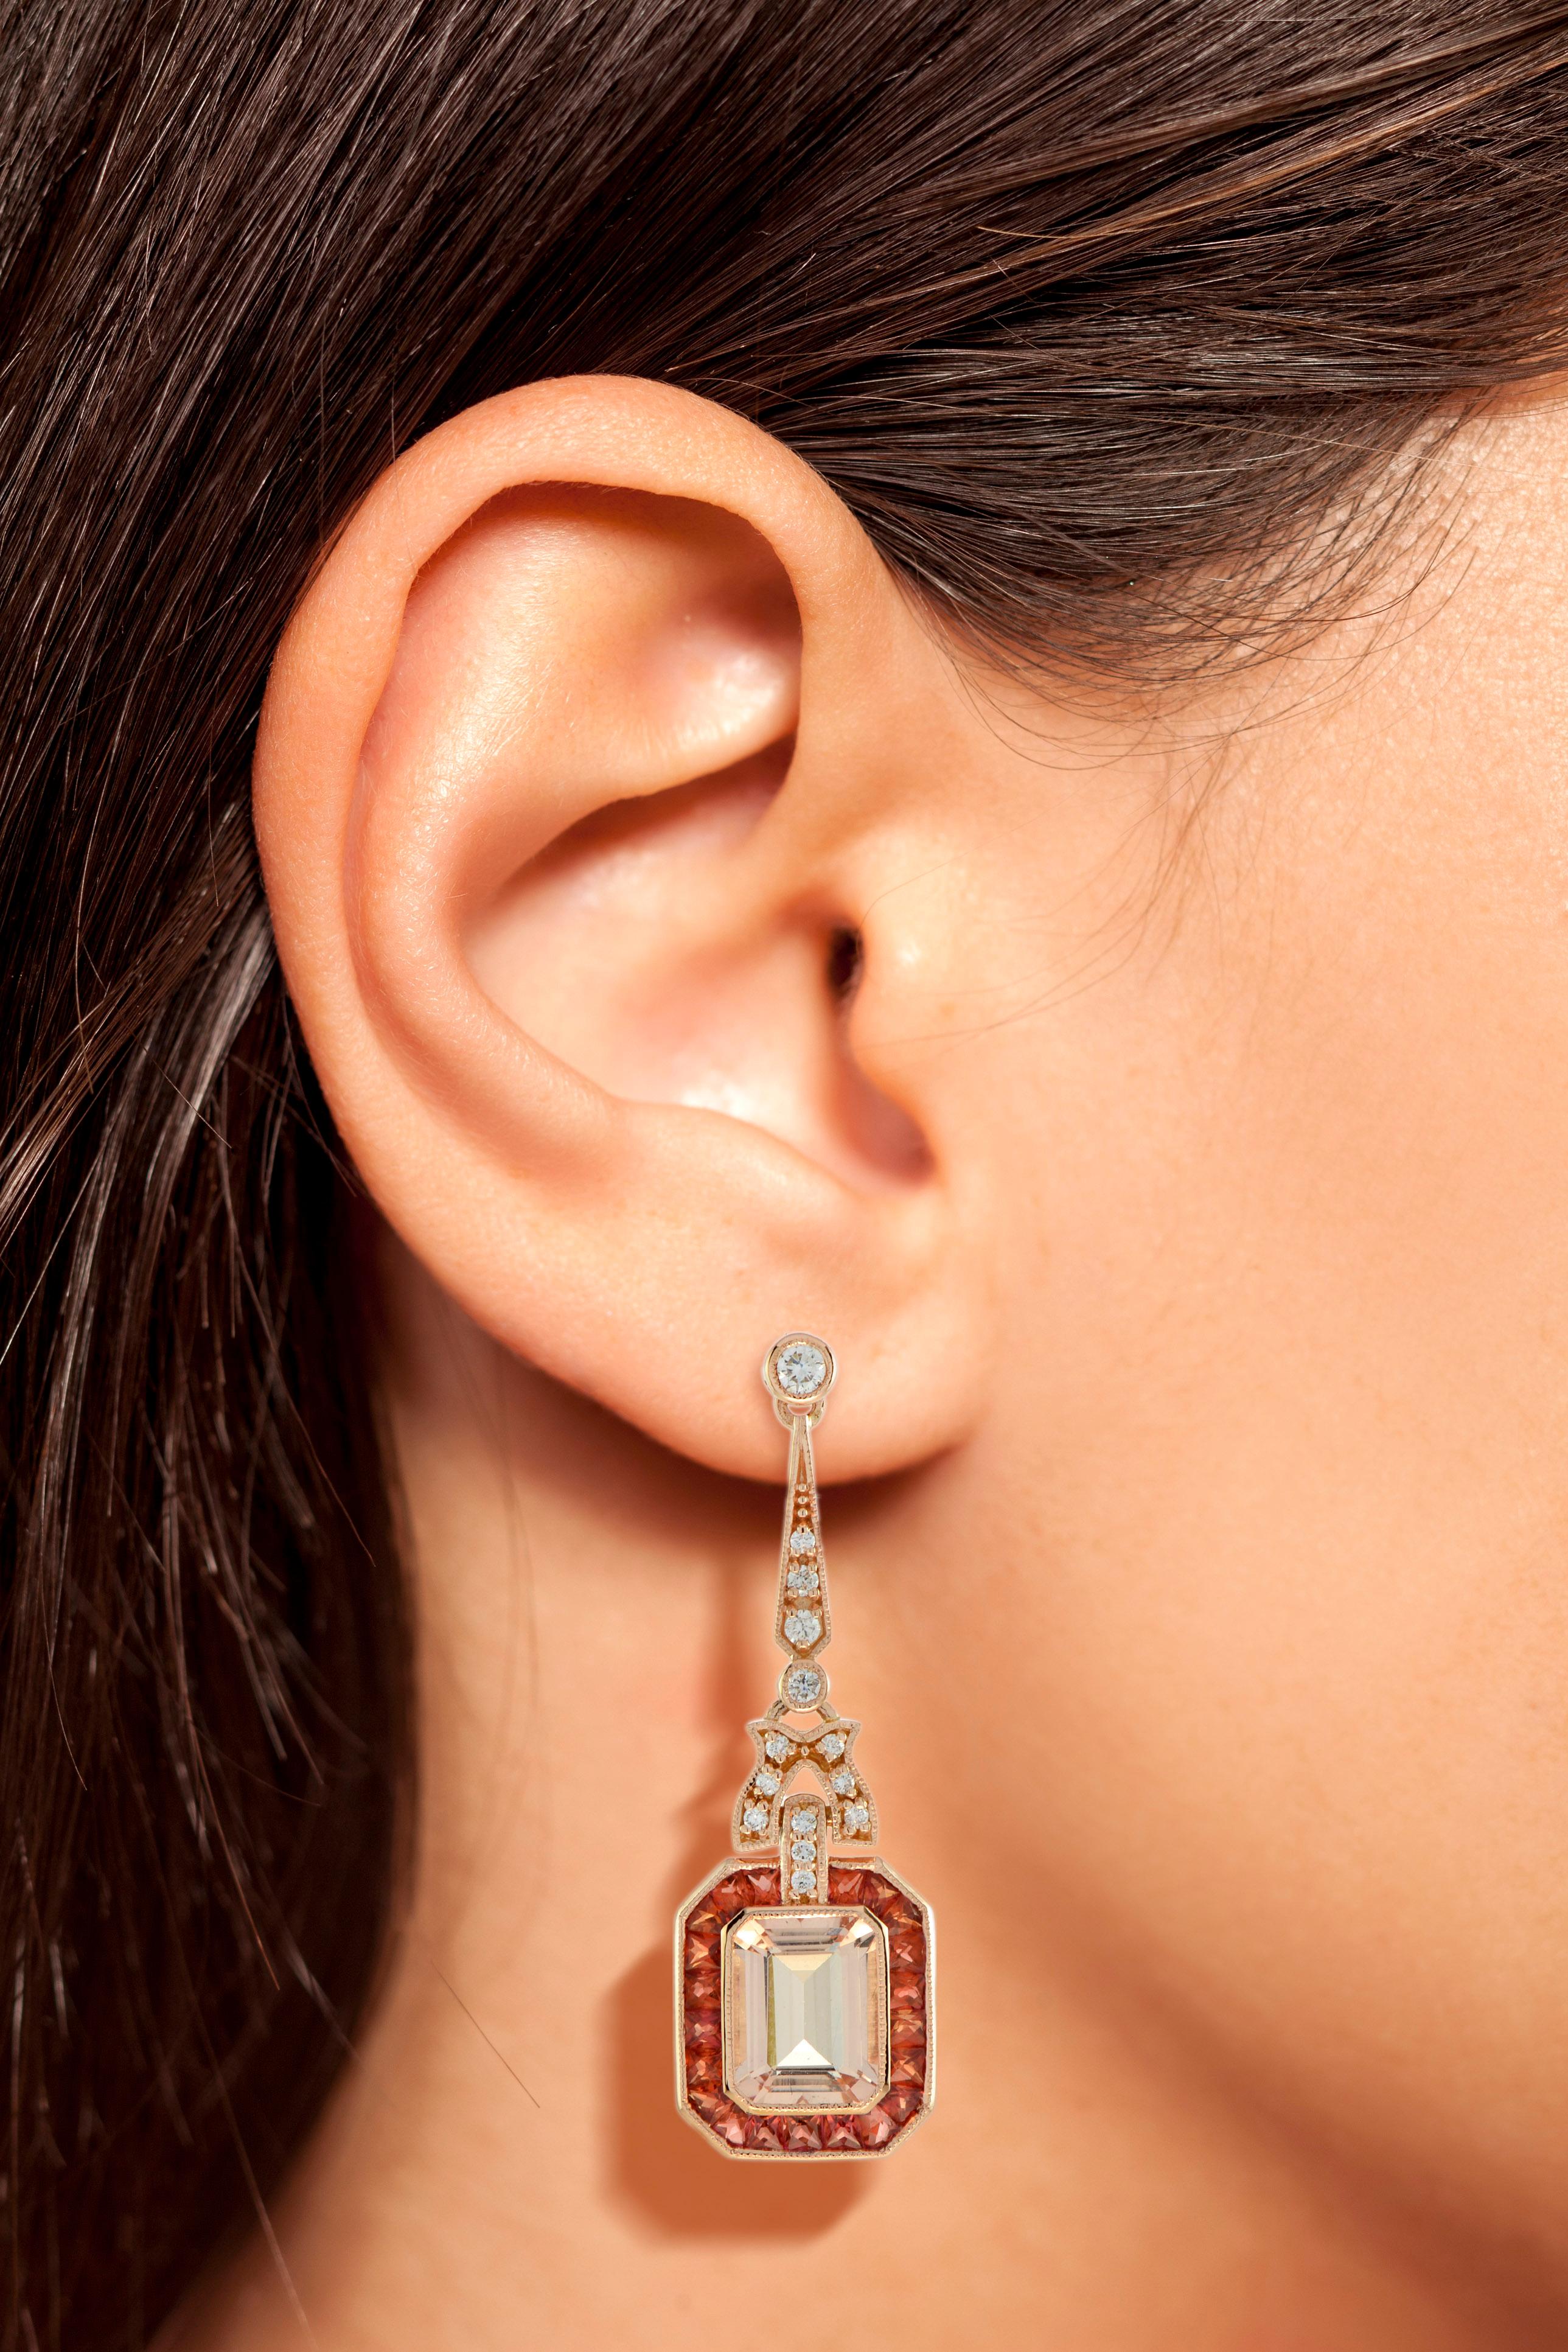 A pair of emerald cut morganite stones, precisely matched by eye, totaling 8.33 carats, and set into a pair of exquisite drop ear studs. These exquisite earrings are complimented by 2.2 carats of French cut orange sapphire and round diamonds